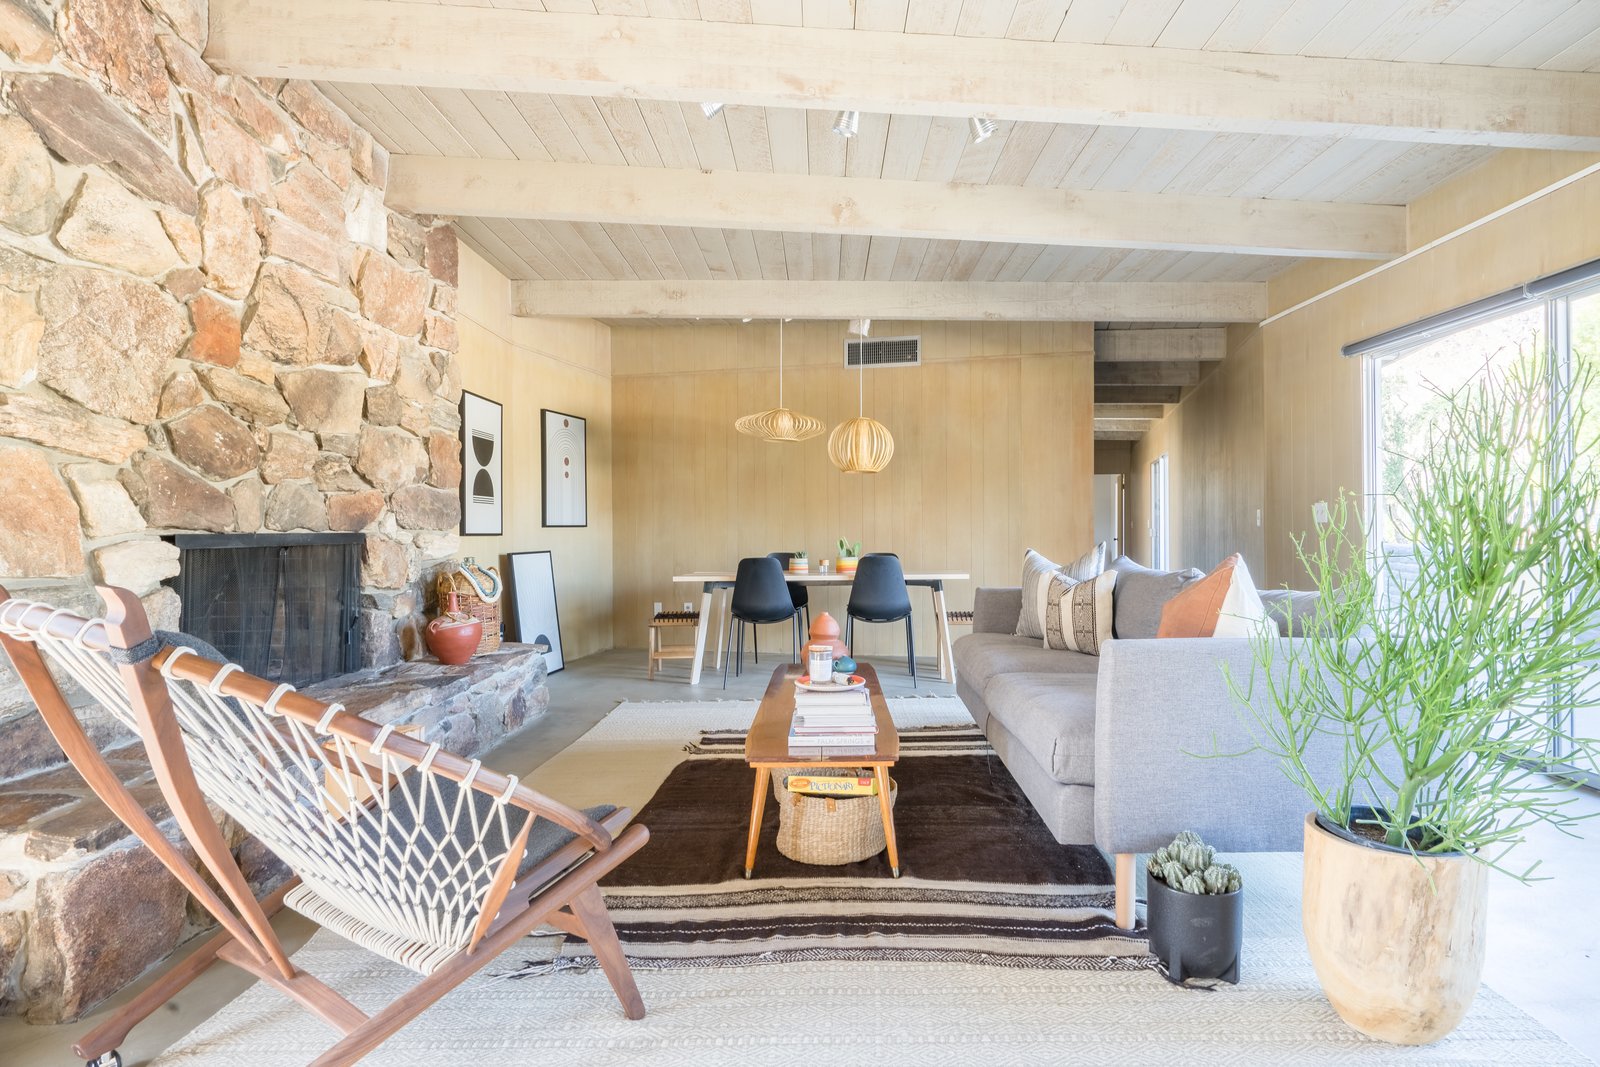 The main hangout space, the living room, is full of fun finds including a Total Design Company rug, local foliage, an HD Buttercup hoop chair and pillows and rugs from The Garage Collective.